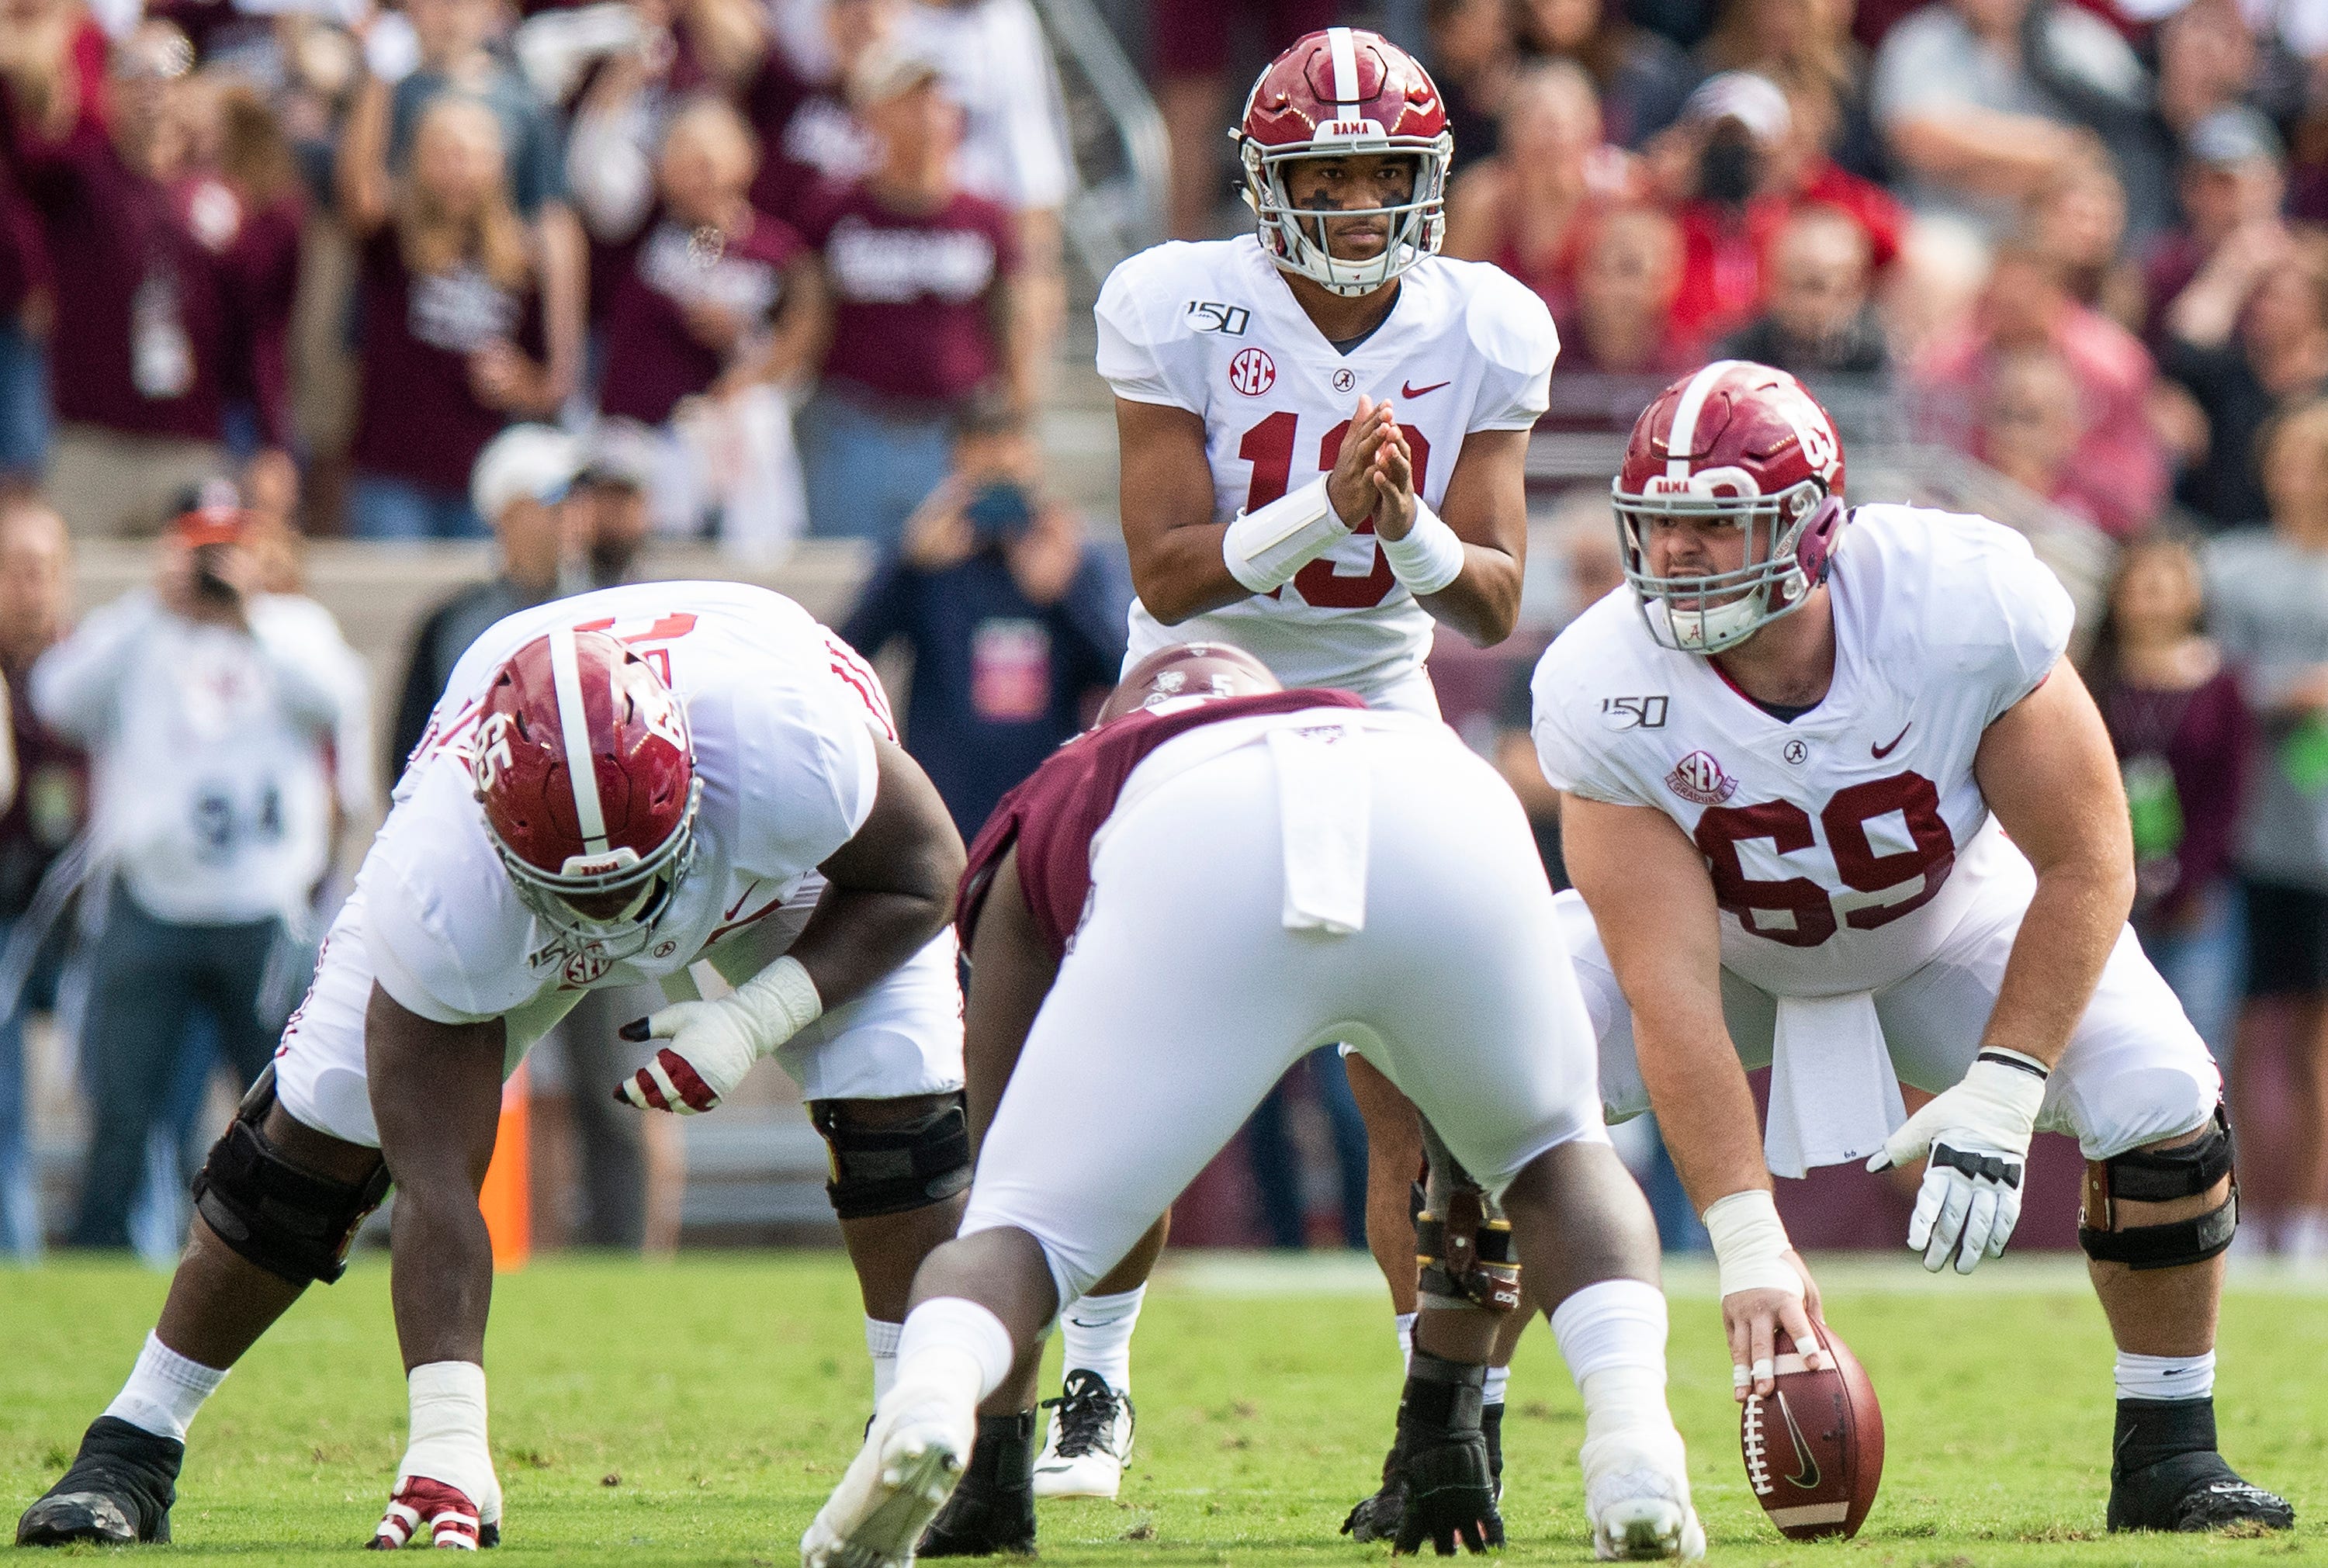 Alabama offensive linemen Deonte Brown (65) and Landon Dickerson (69) line up in front of quarterback Tua Tagovailoa (13) against Texas A&M at Kyle Field in College Station, Texas on Saturday October 12, 2019.